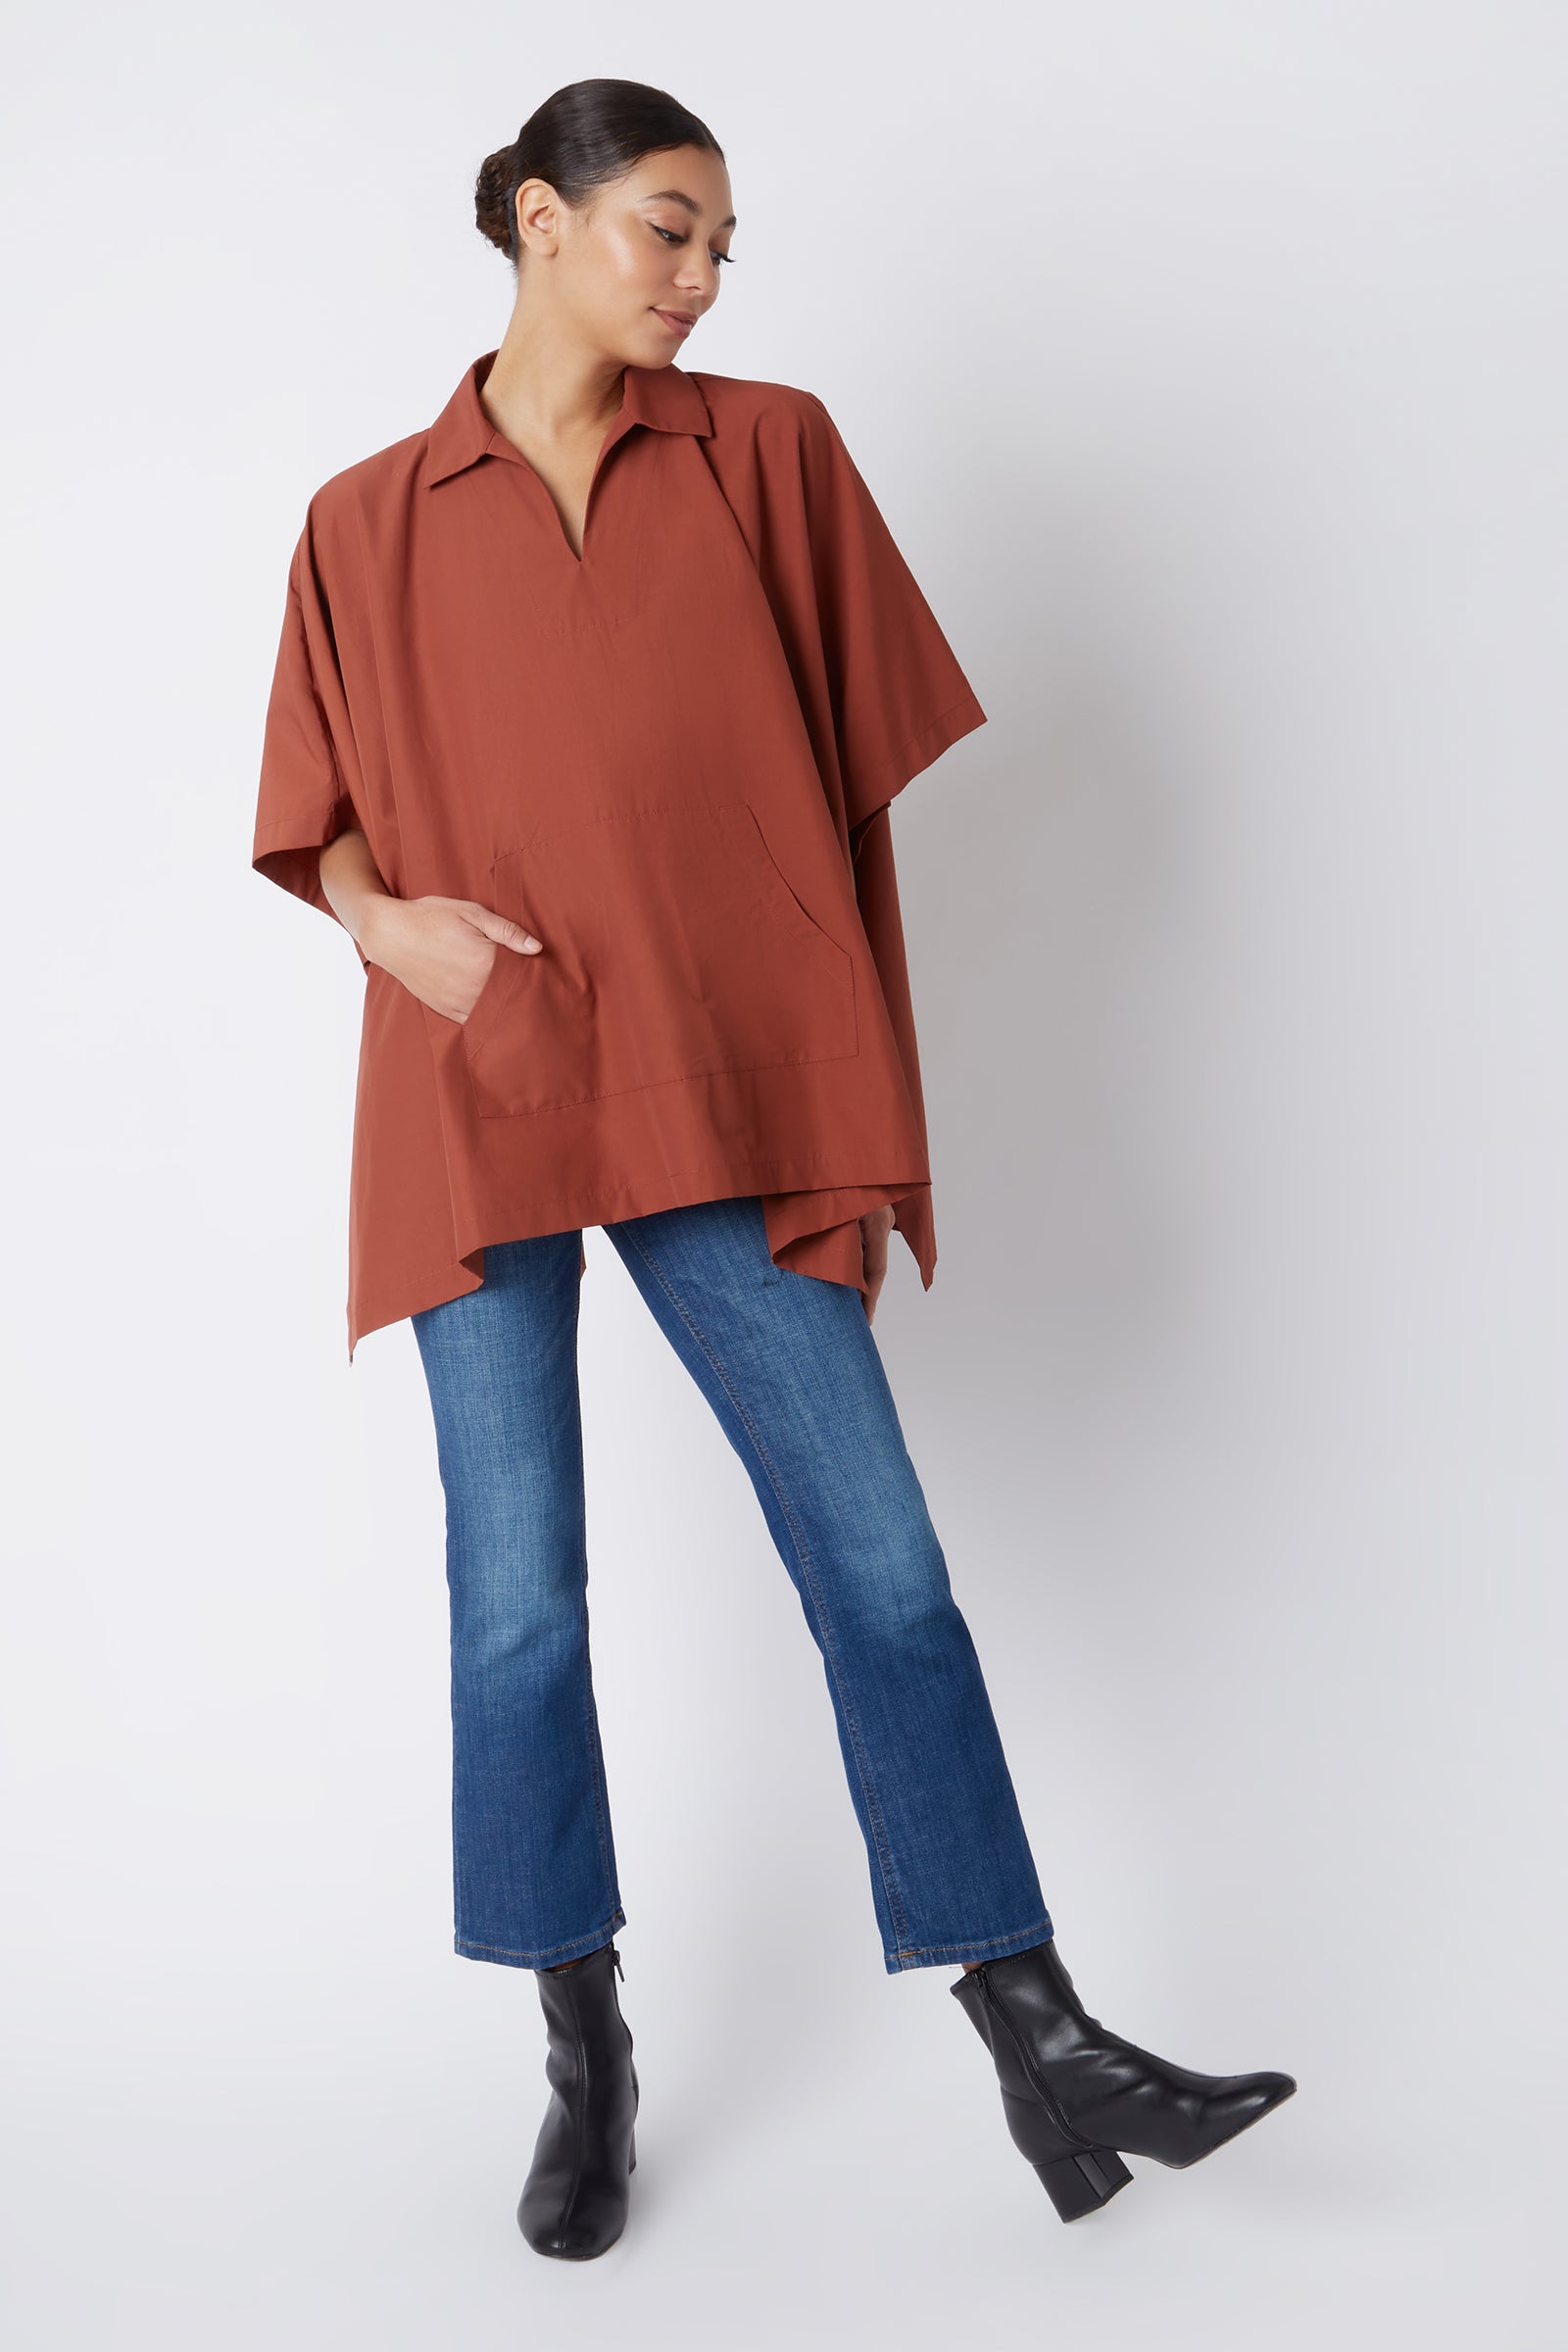 Kal Rieman Pocket Poncho in Rust Italian Broadcloth on Model Looking Down with Hand in Pocket Full Front View